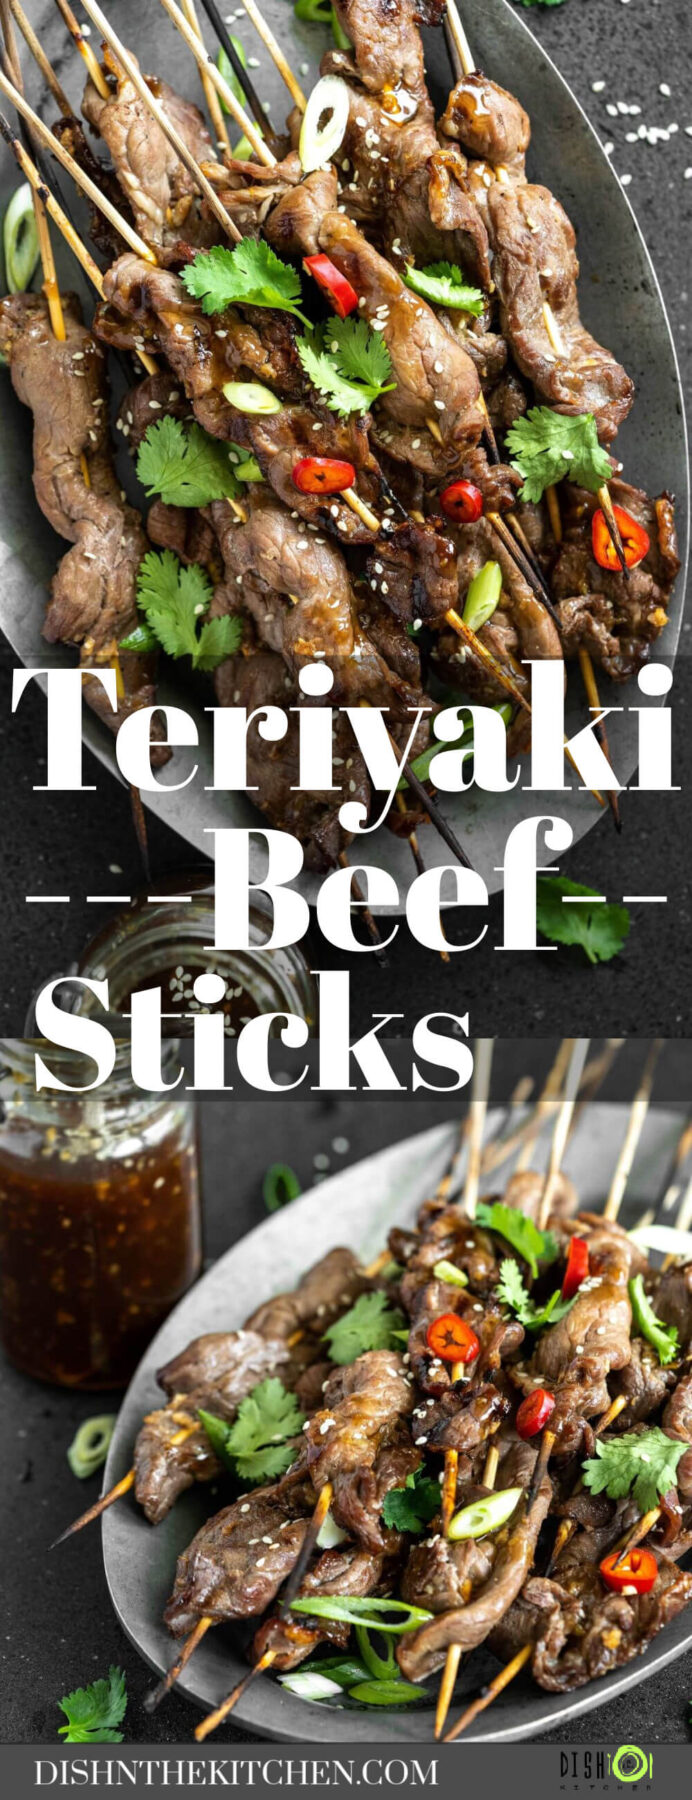 Pinterest image featuring a platter of grilled Teriyaki Beef Sticks garnished with chopped green herbs and red hot peppers.